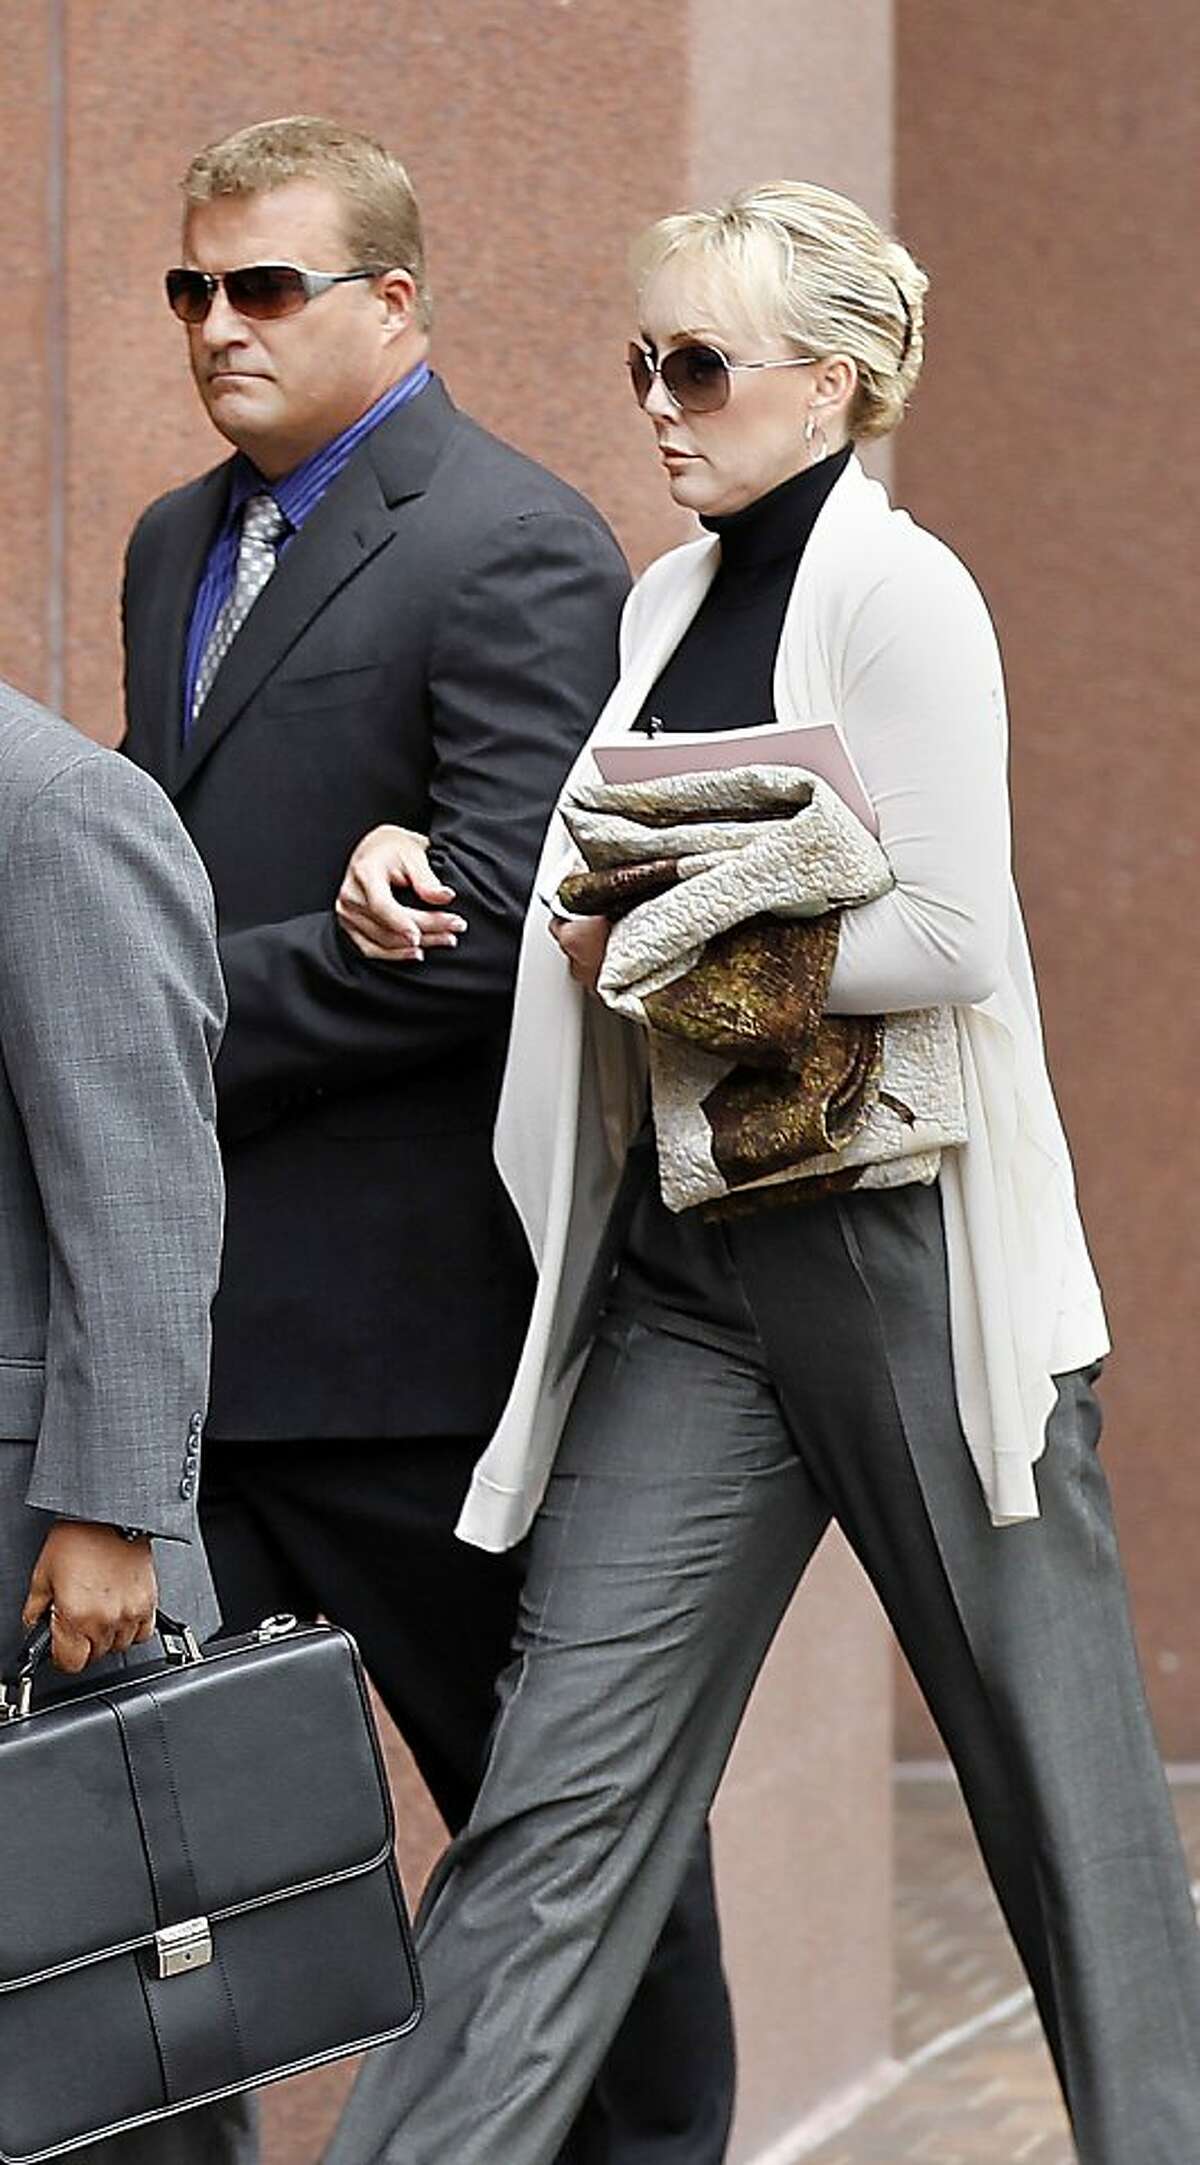 Defendant Theresa Erickson, right, and her husband John Erickson, arrive at Federal Court in downtown San Diego, Friday Feb. 24, 2012. Erickson, 44, a California lawyer who was a respected reproductive law specialist was sentenced Friday to five months in prison and nine months of home confinement for her role in what prosecutors say was a baby-selling scheme. U.S. District Court Judge Anthony Bataglia also ordered Theresa Erickson, 44, to pay a $70,000 fine. Co-defendant Carla Chambers was sentenced to five months in prison and seven months in home confinement. Both women had faced up to five years in prison. (AP Photo/U-T San Diego, ) SAN DIEGO COUNTY OUT; NO SALES; COMMERCIAL INTERNET OUT; FOREIGN OUT